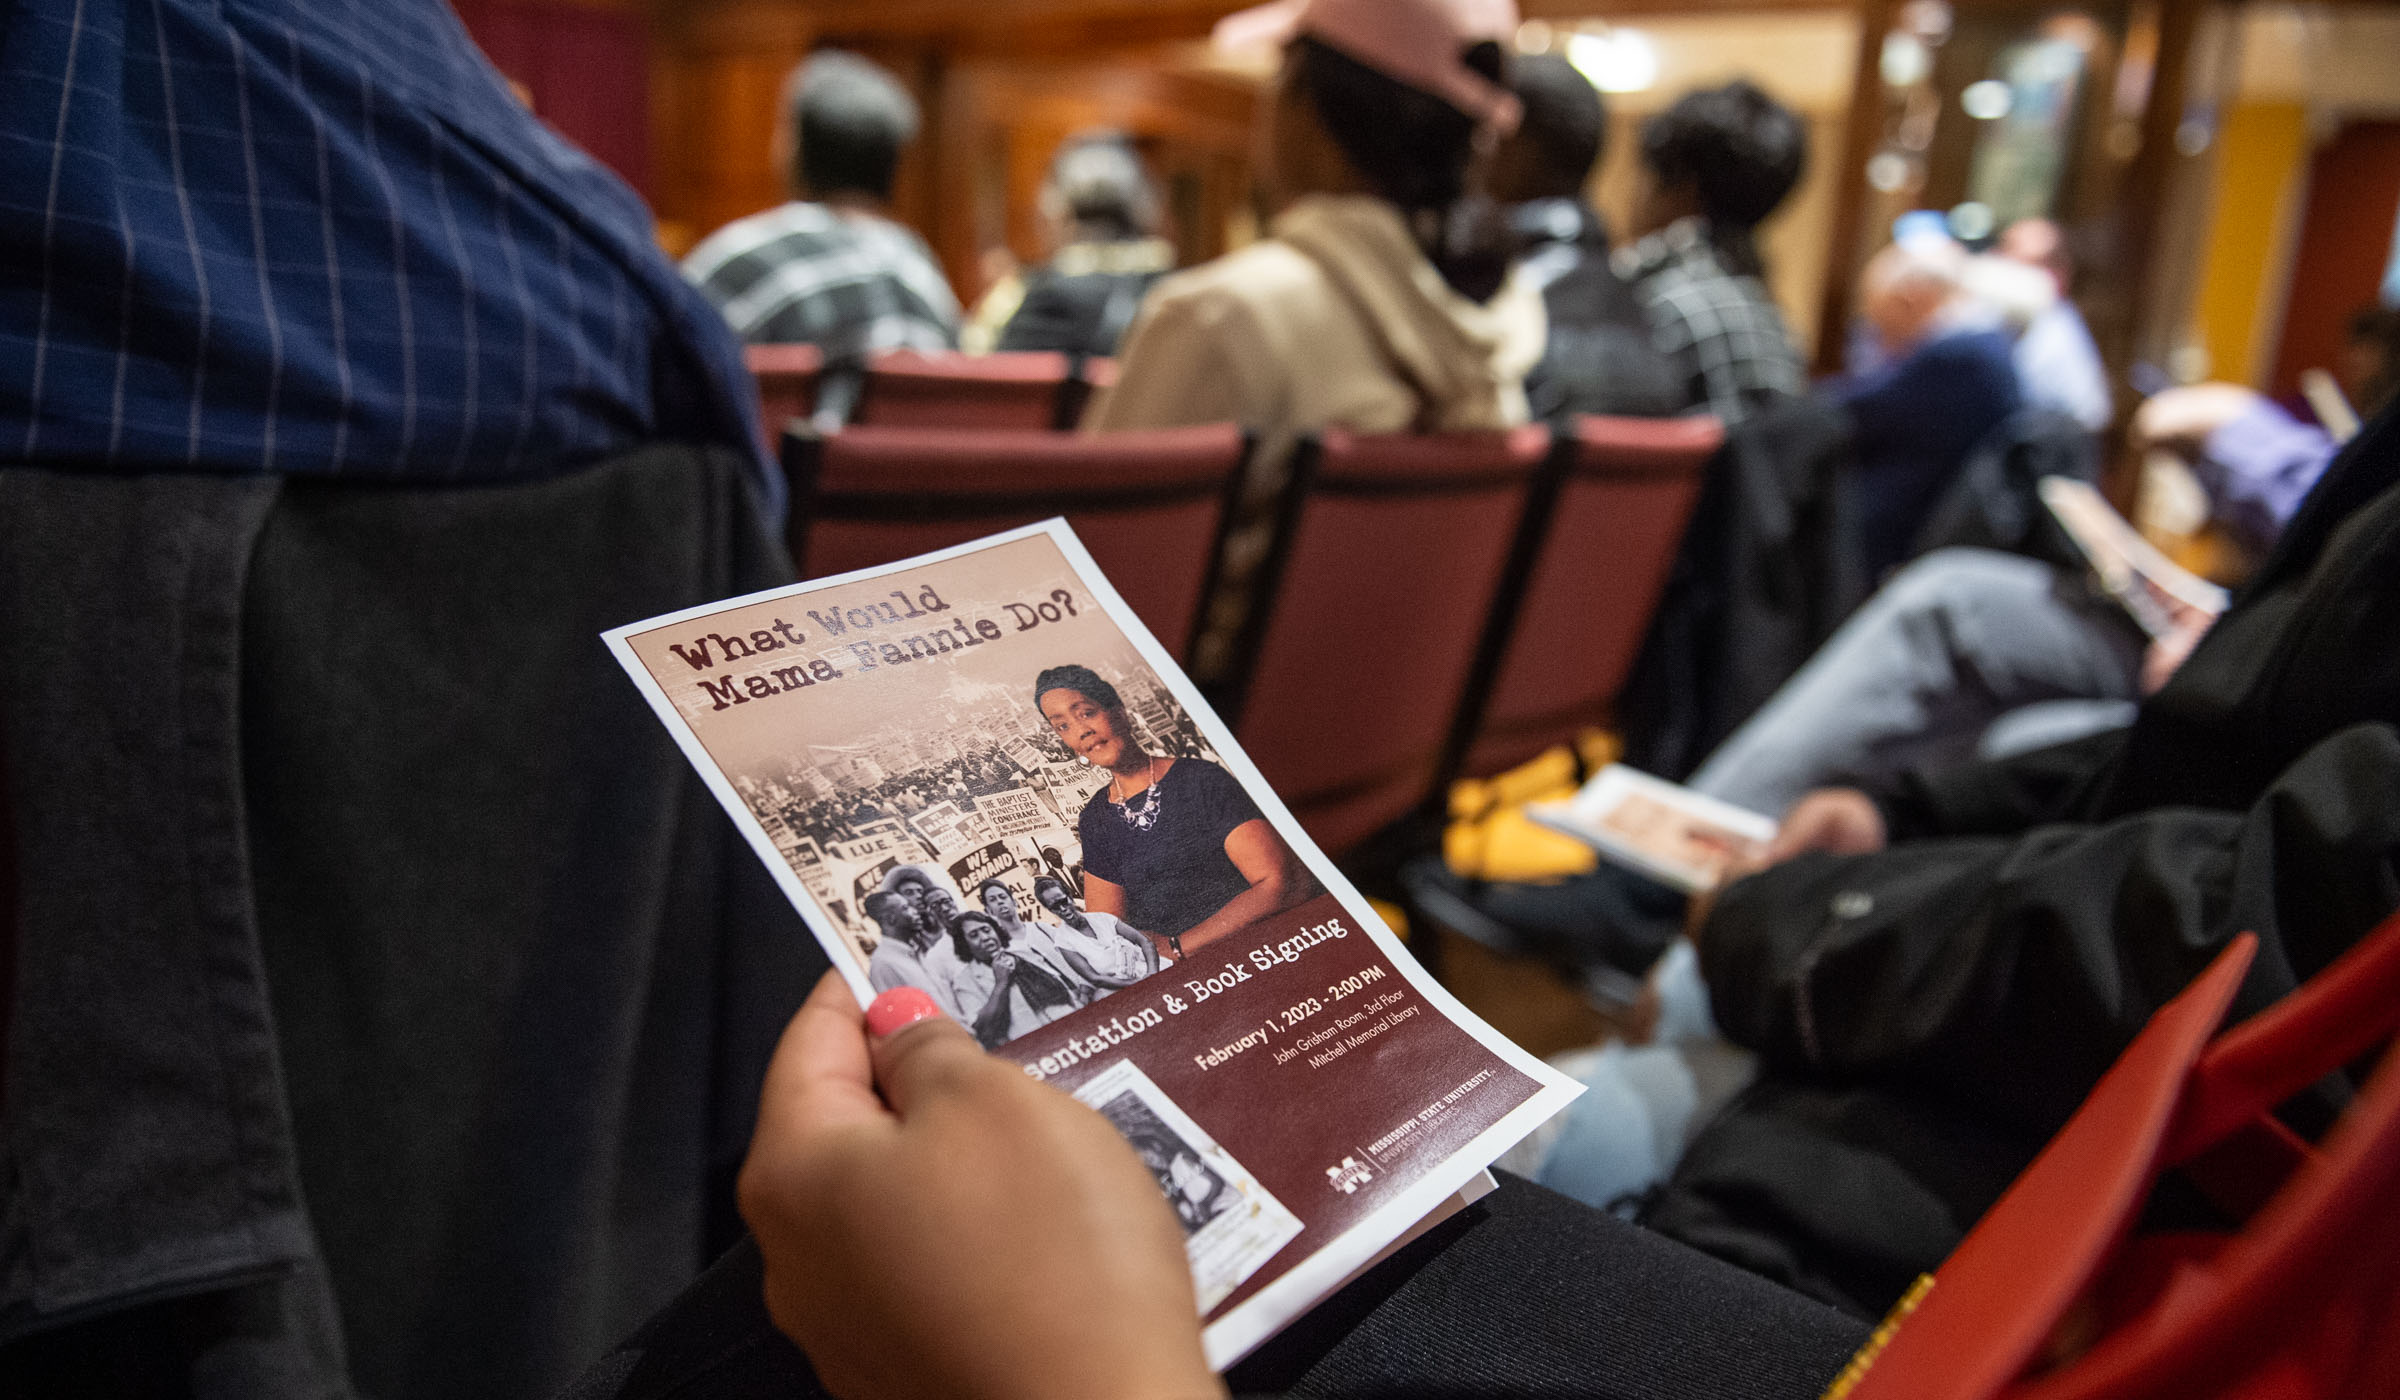 A &quot;What Would Mama Fannie Do?&quot; event program is held in the hand of an event attendee in the foreground, with the Grisham Room and other seated attendees out of focus beyond.